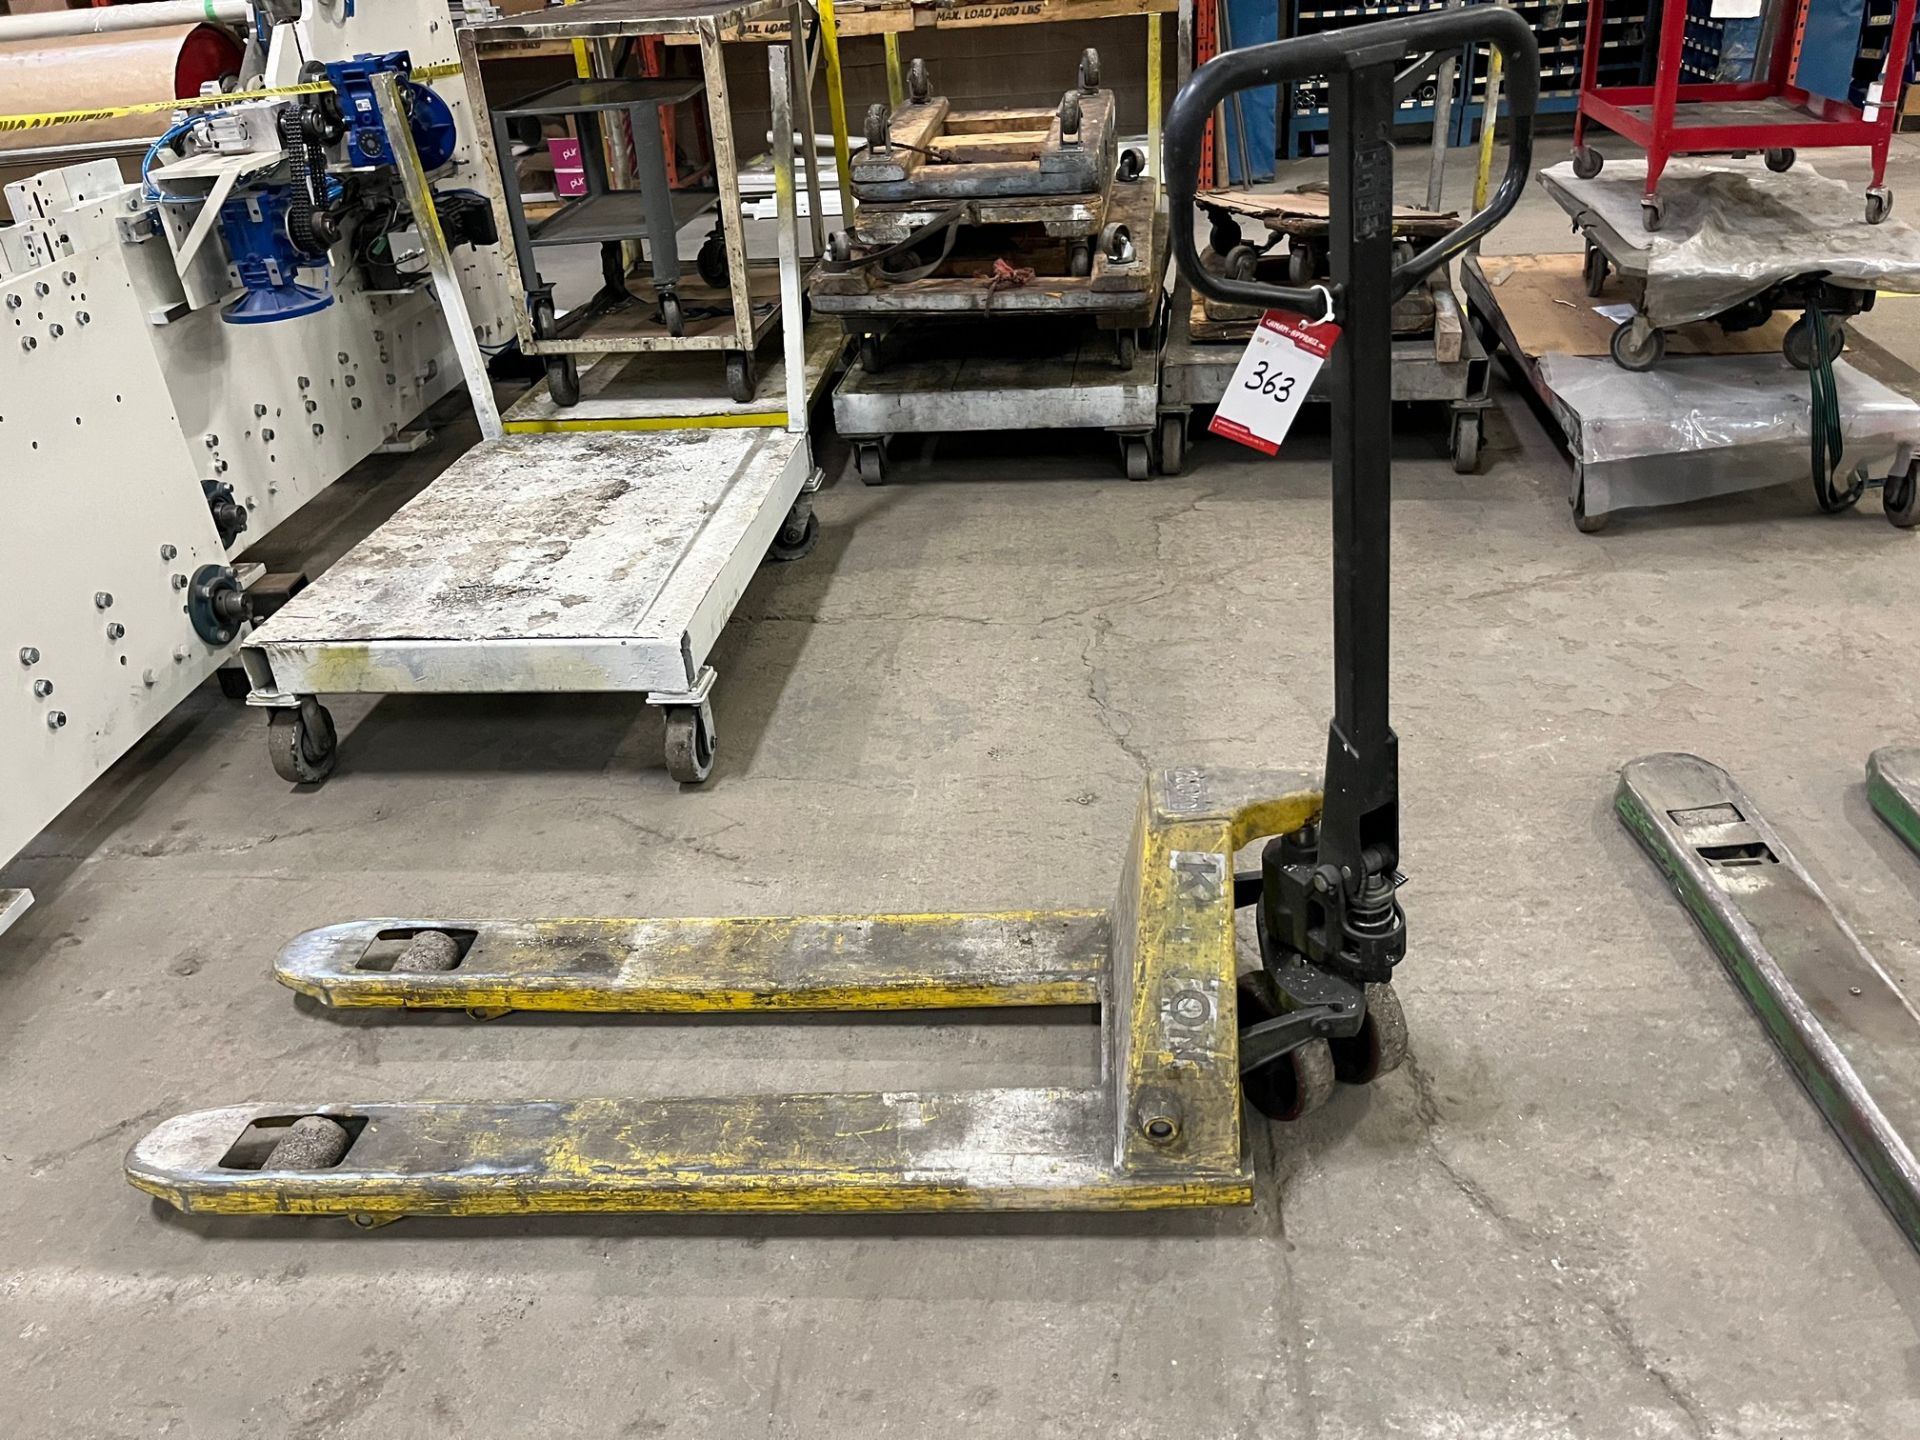 PALLET JACK (NOTE: SUBJECT TO LATE REMOVAL, PICKUP AFTER JUNE 3RD)